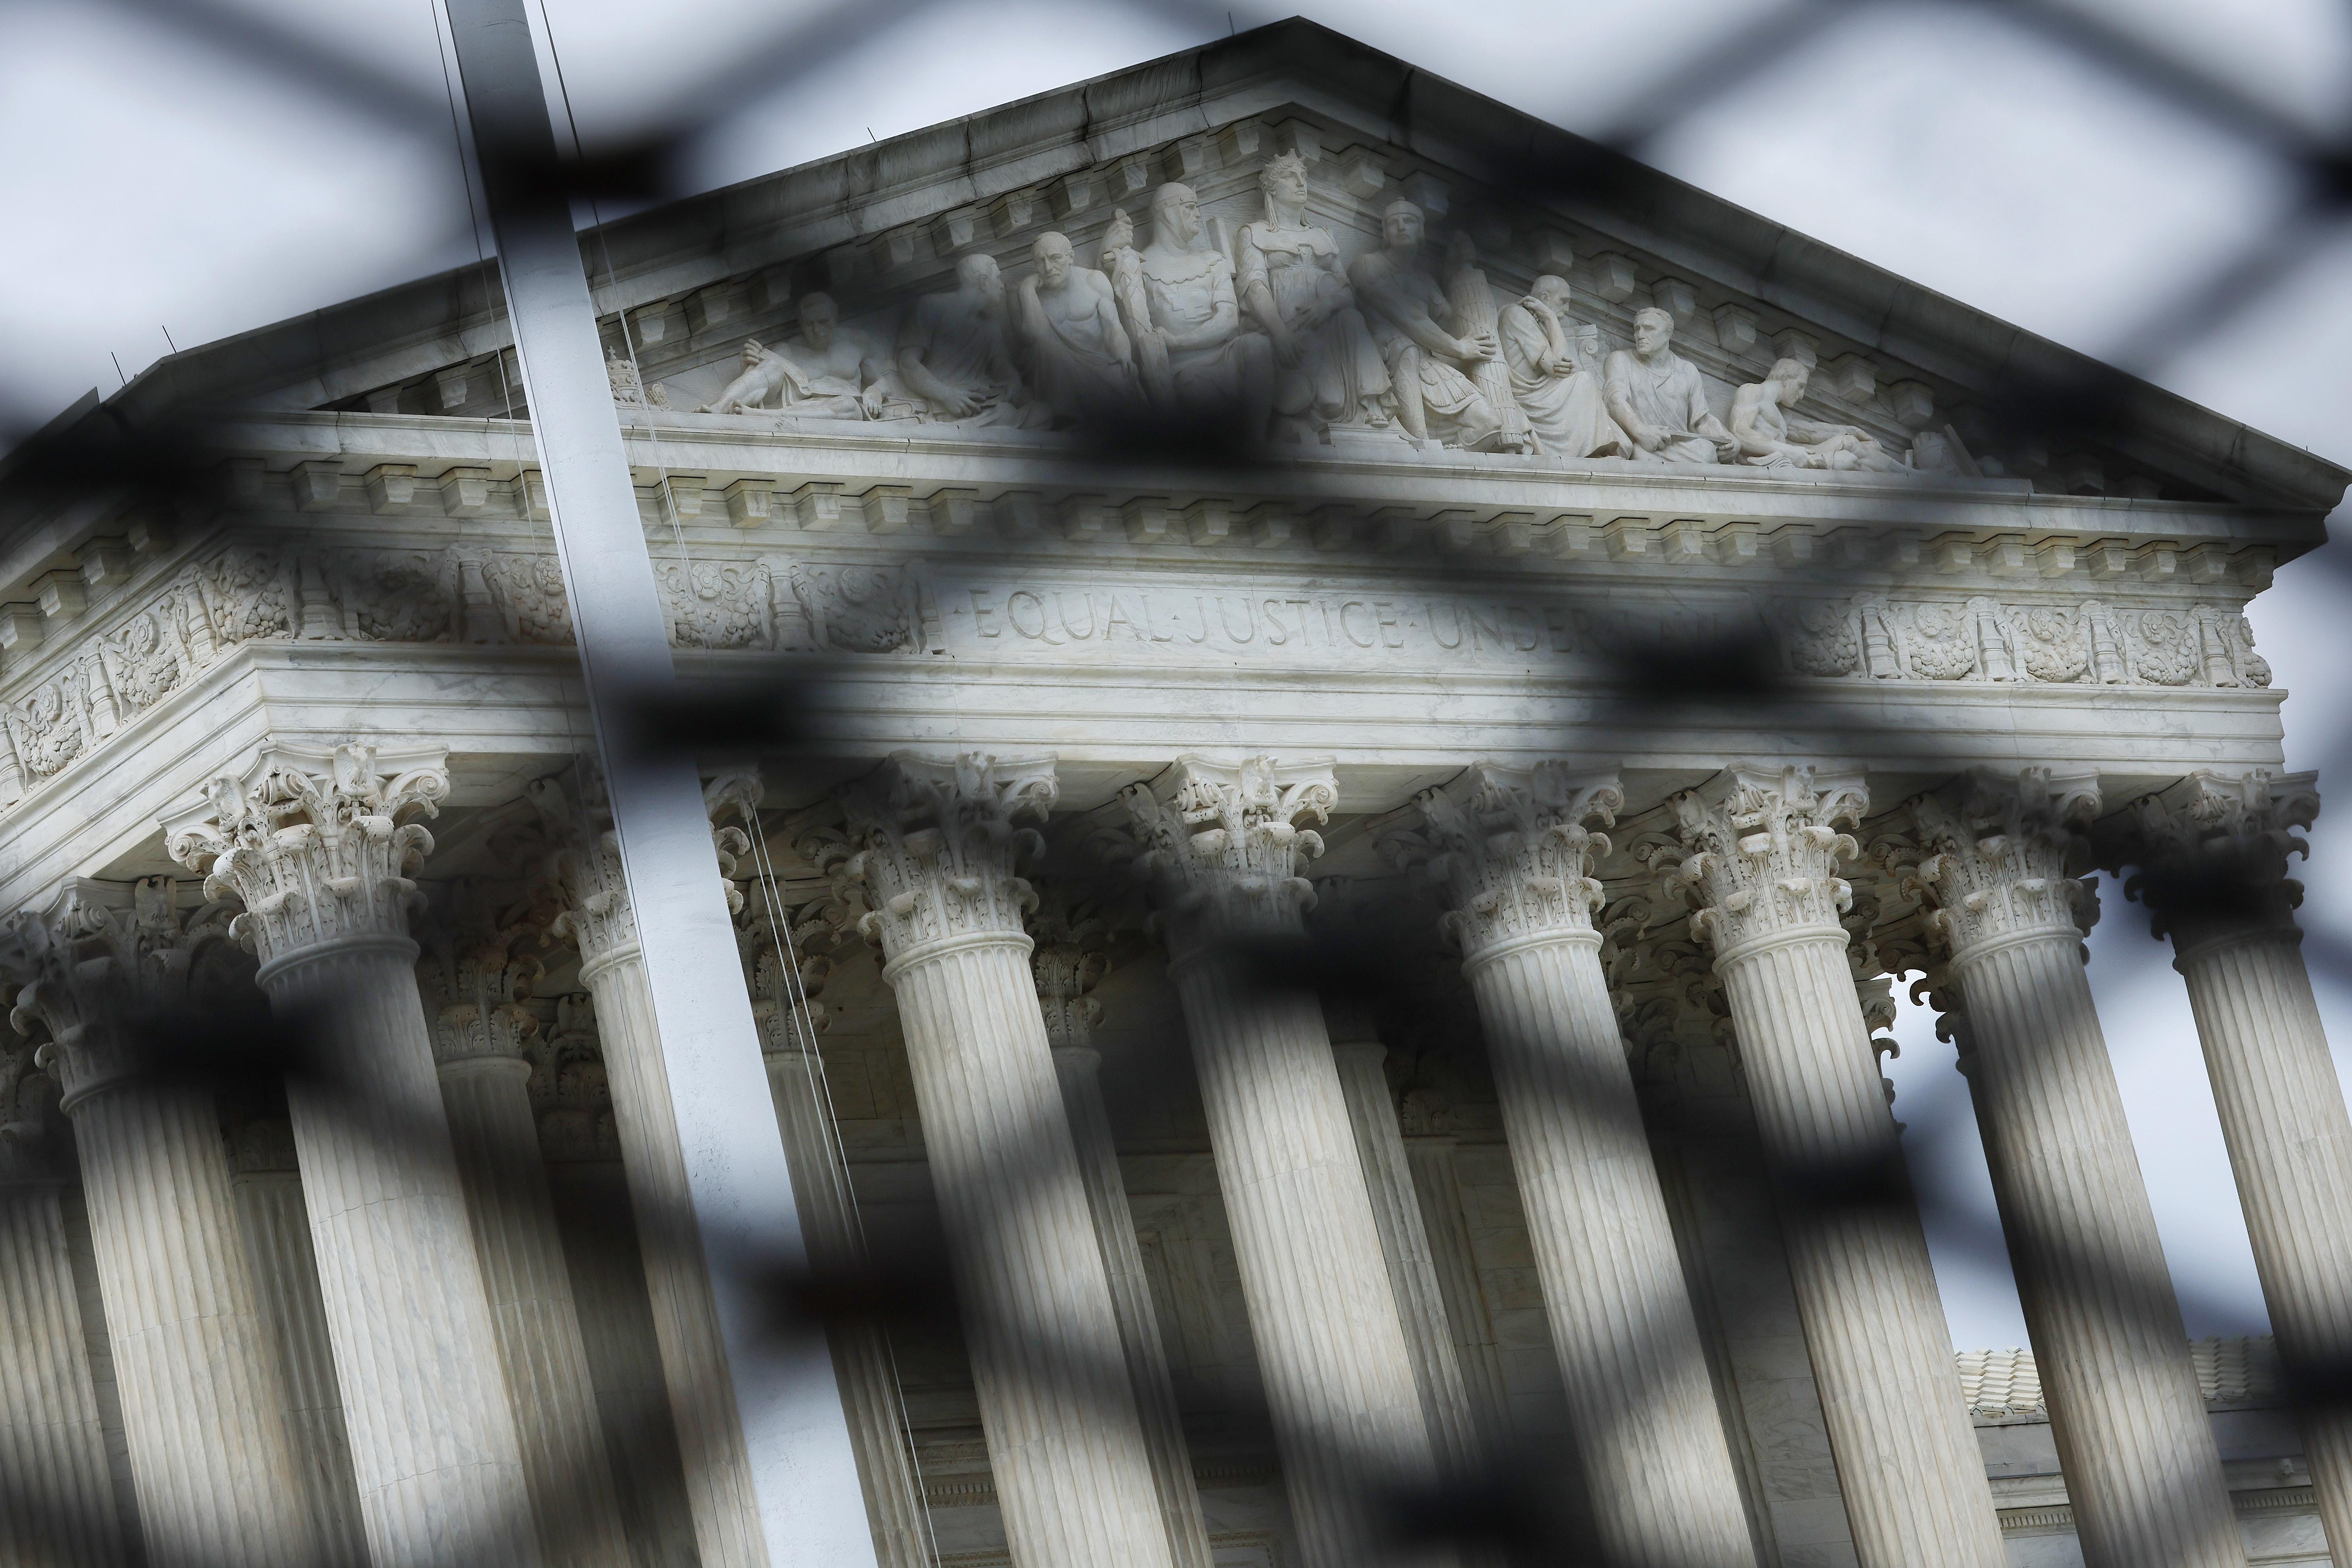 The Supreme Court behind protective fencing